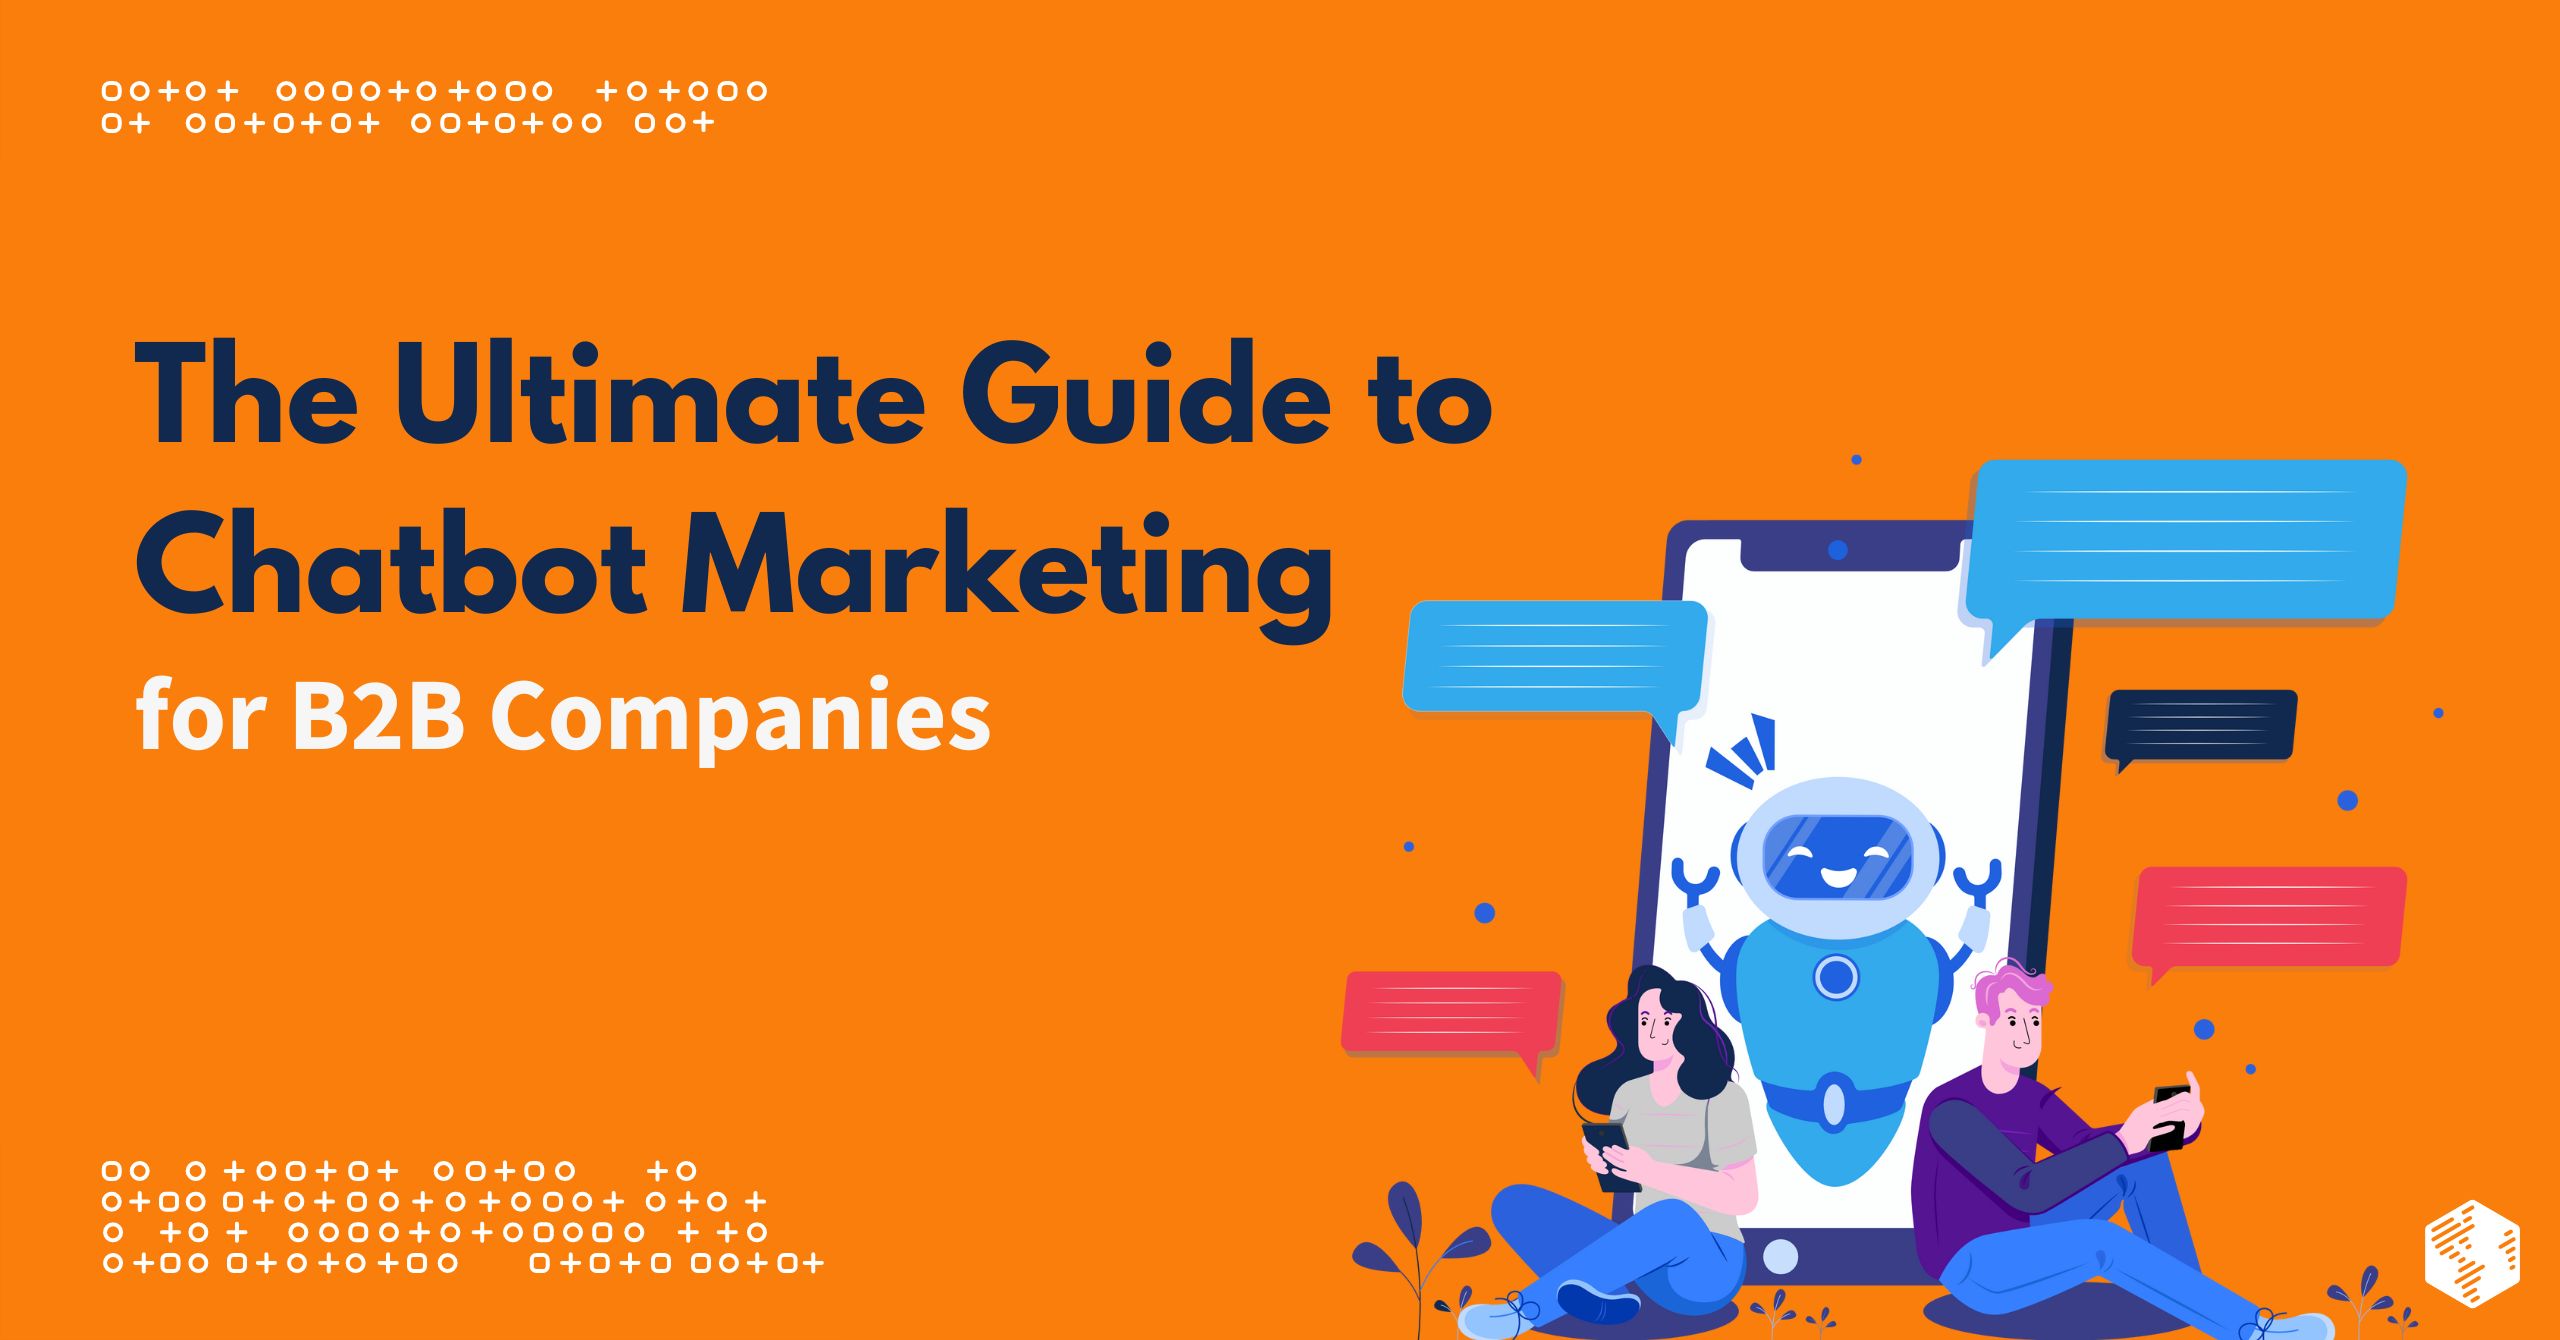 The Ultimate Guide to Chatbot Marketing for B2B Companies